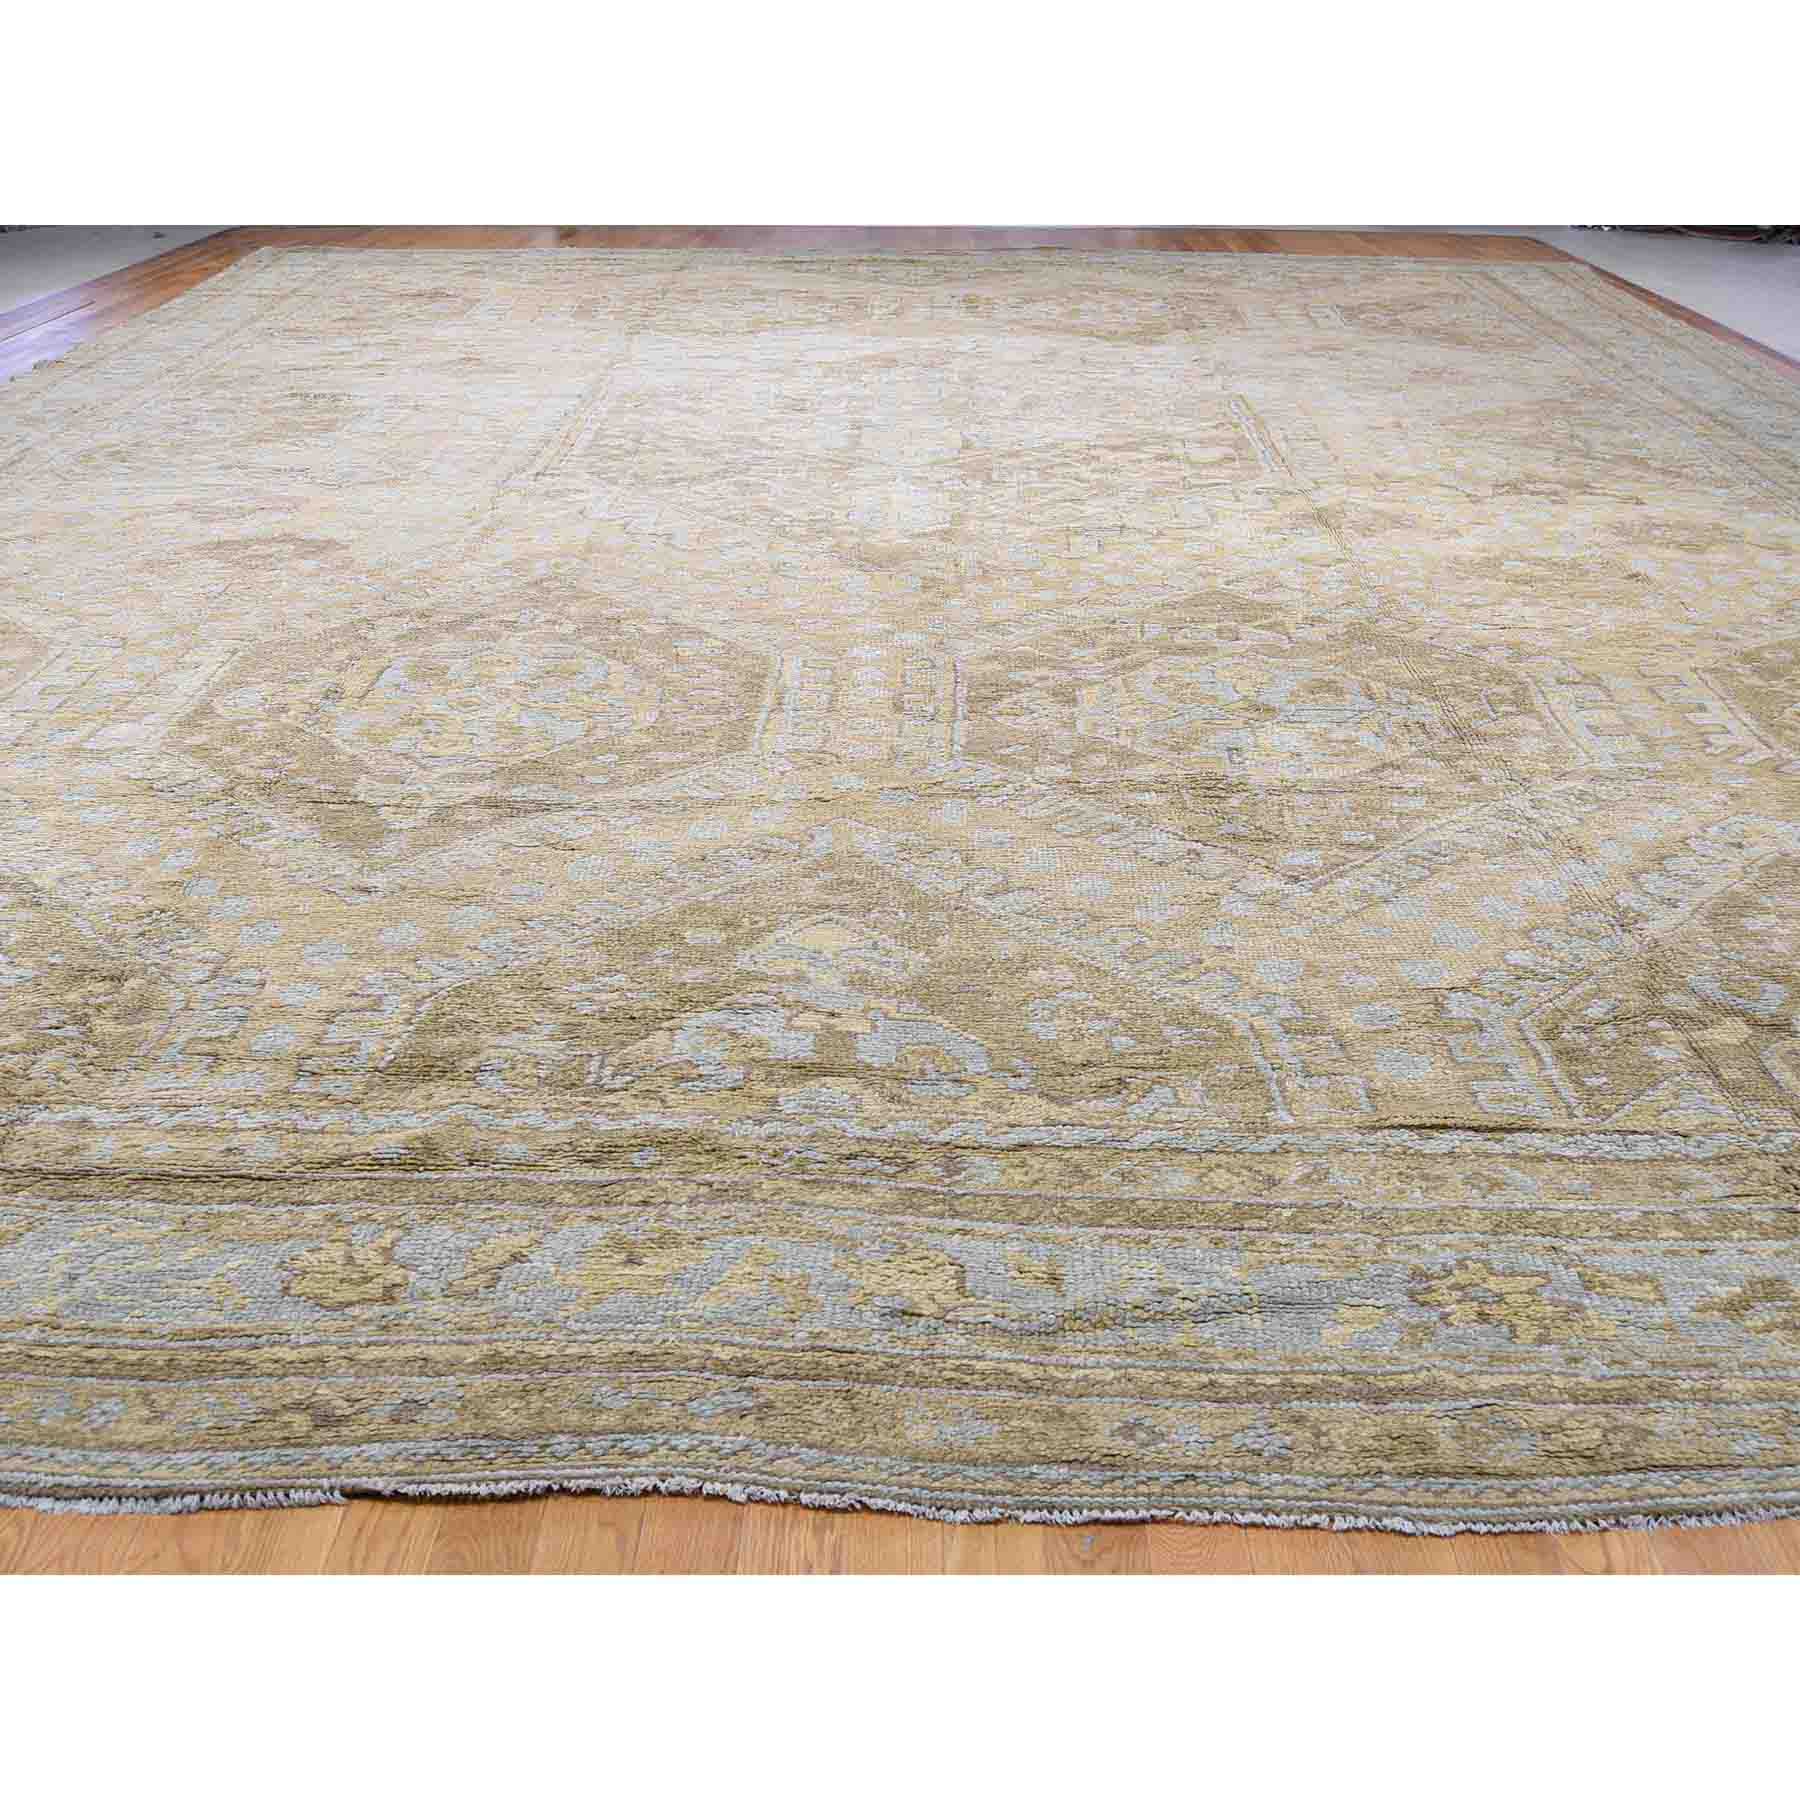 Antique-Hand-Knotted-Rug-195310